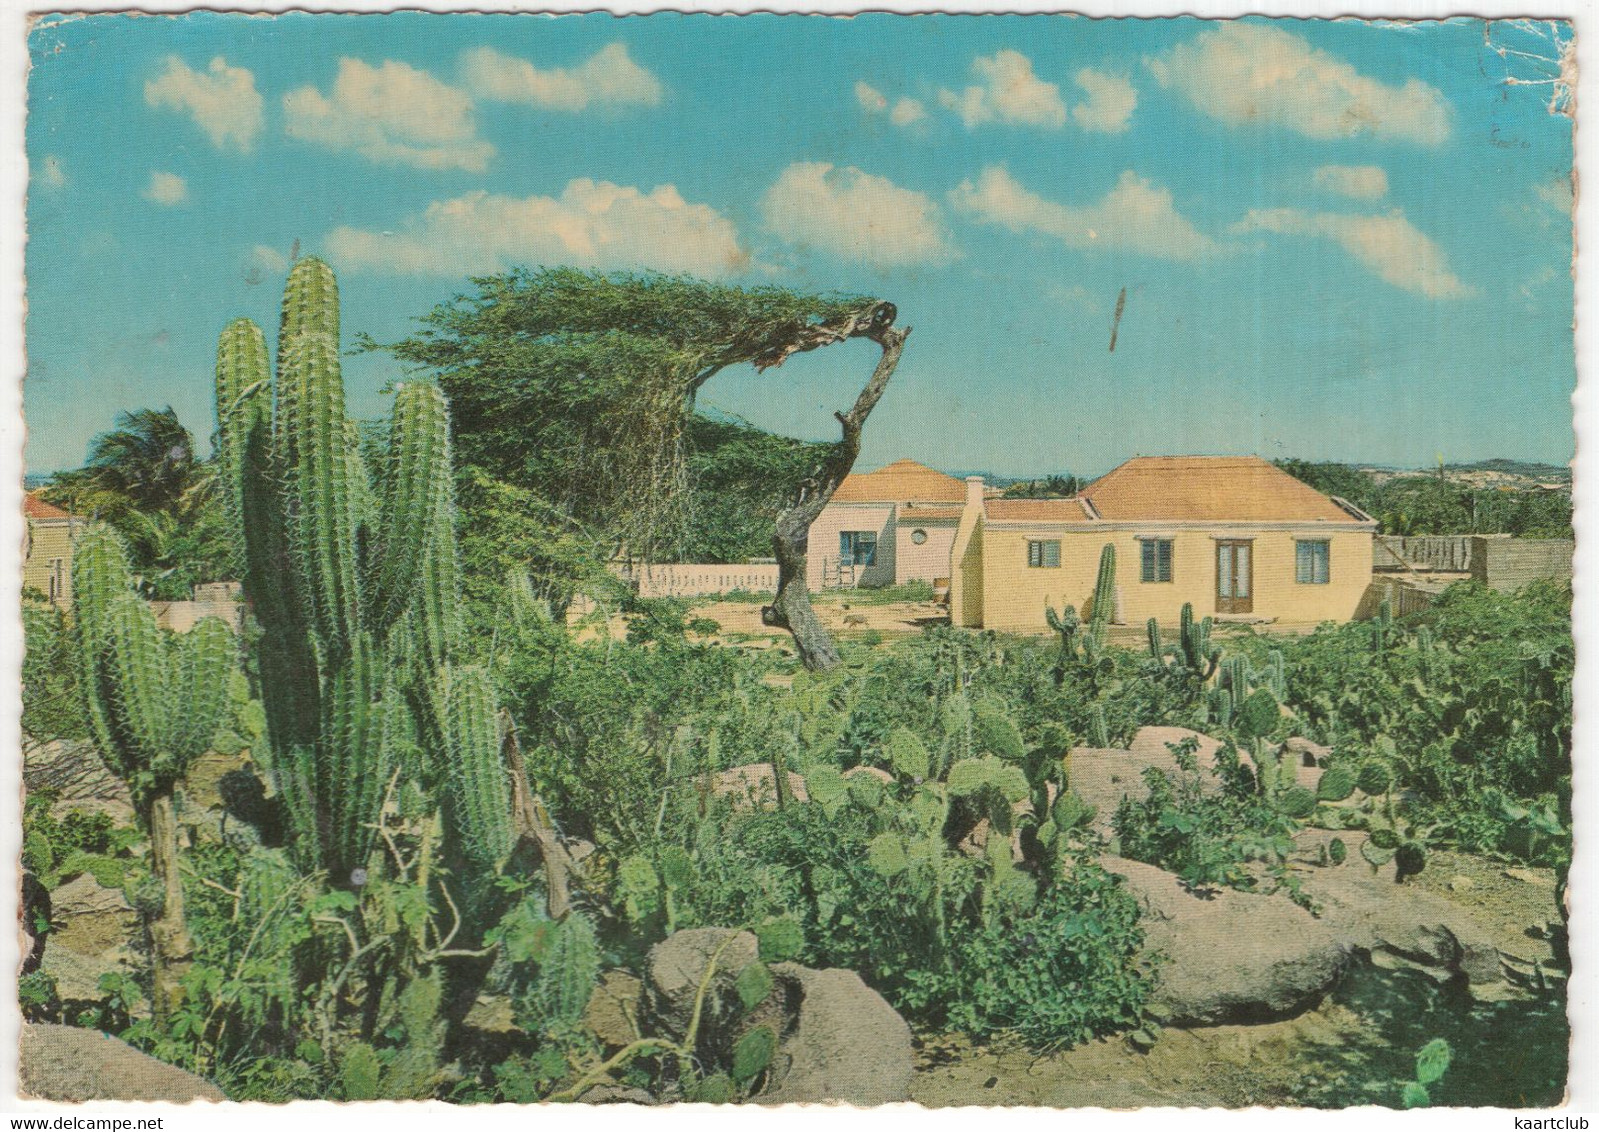 Aruba - Cactusfield With Typical Country Houses - (Neth. Antilles ) - Aruba